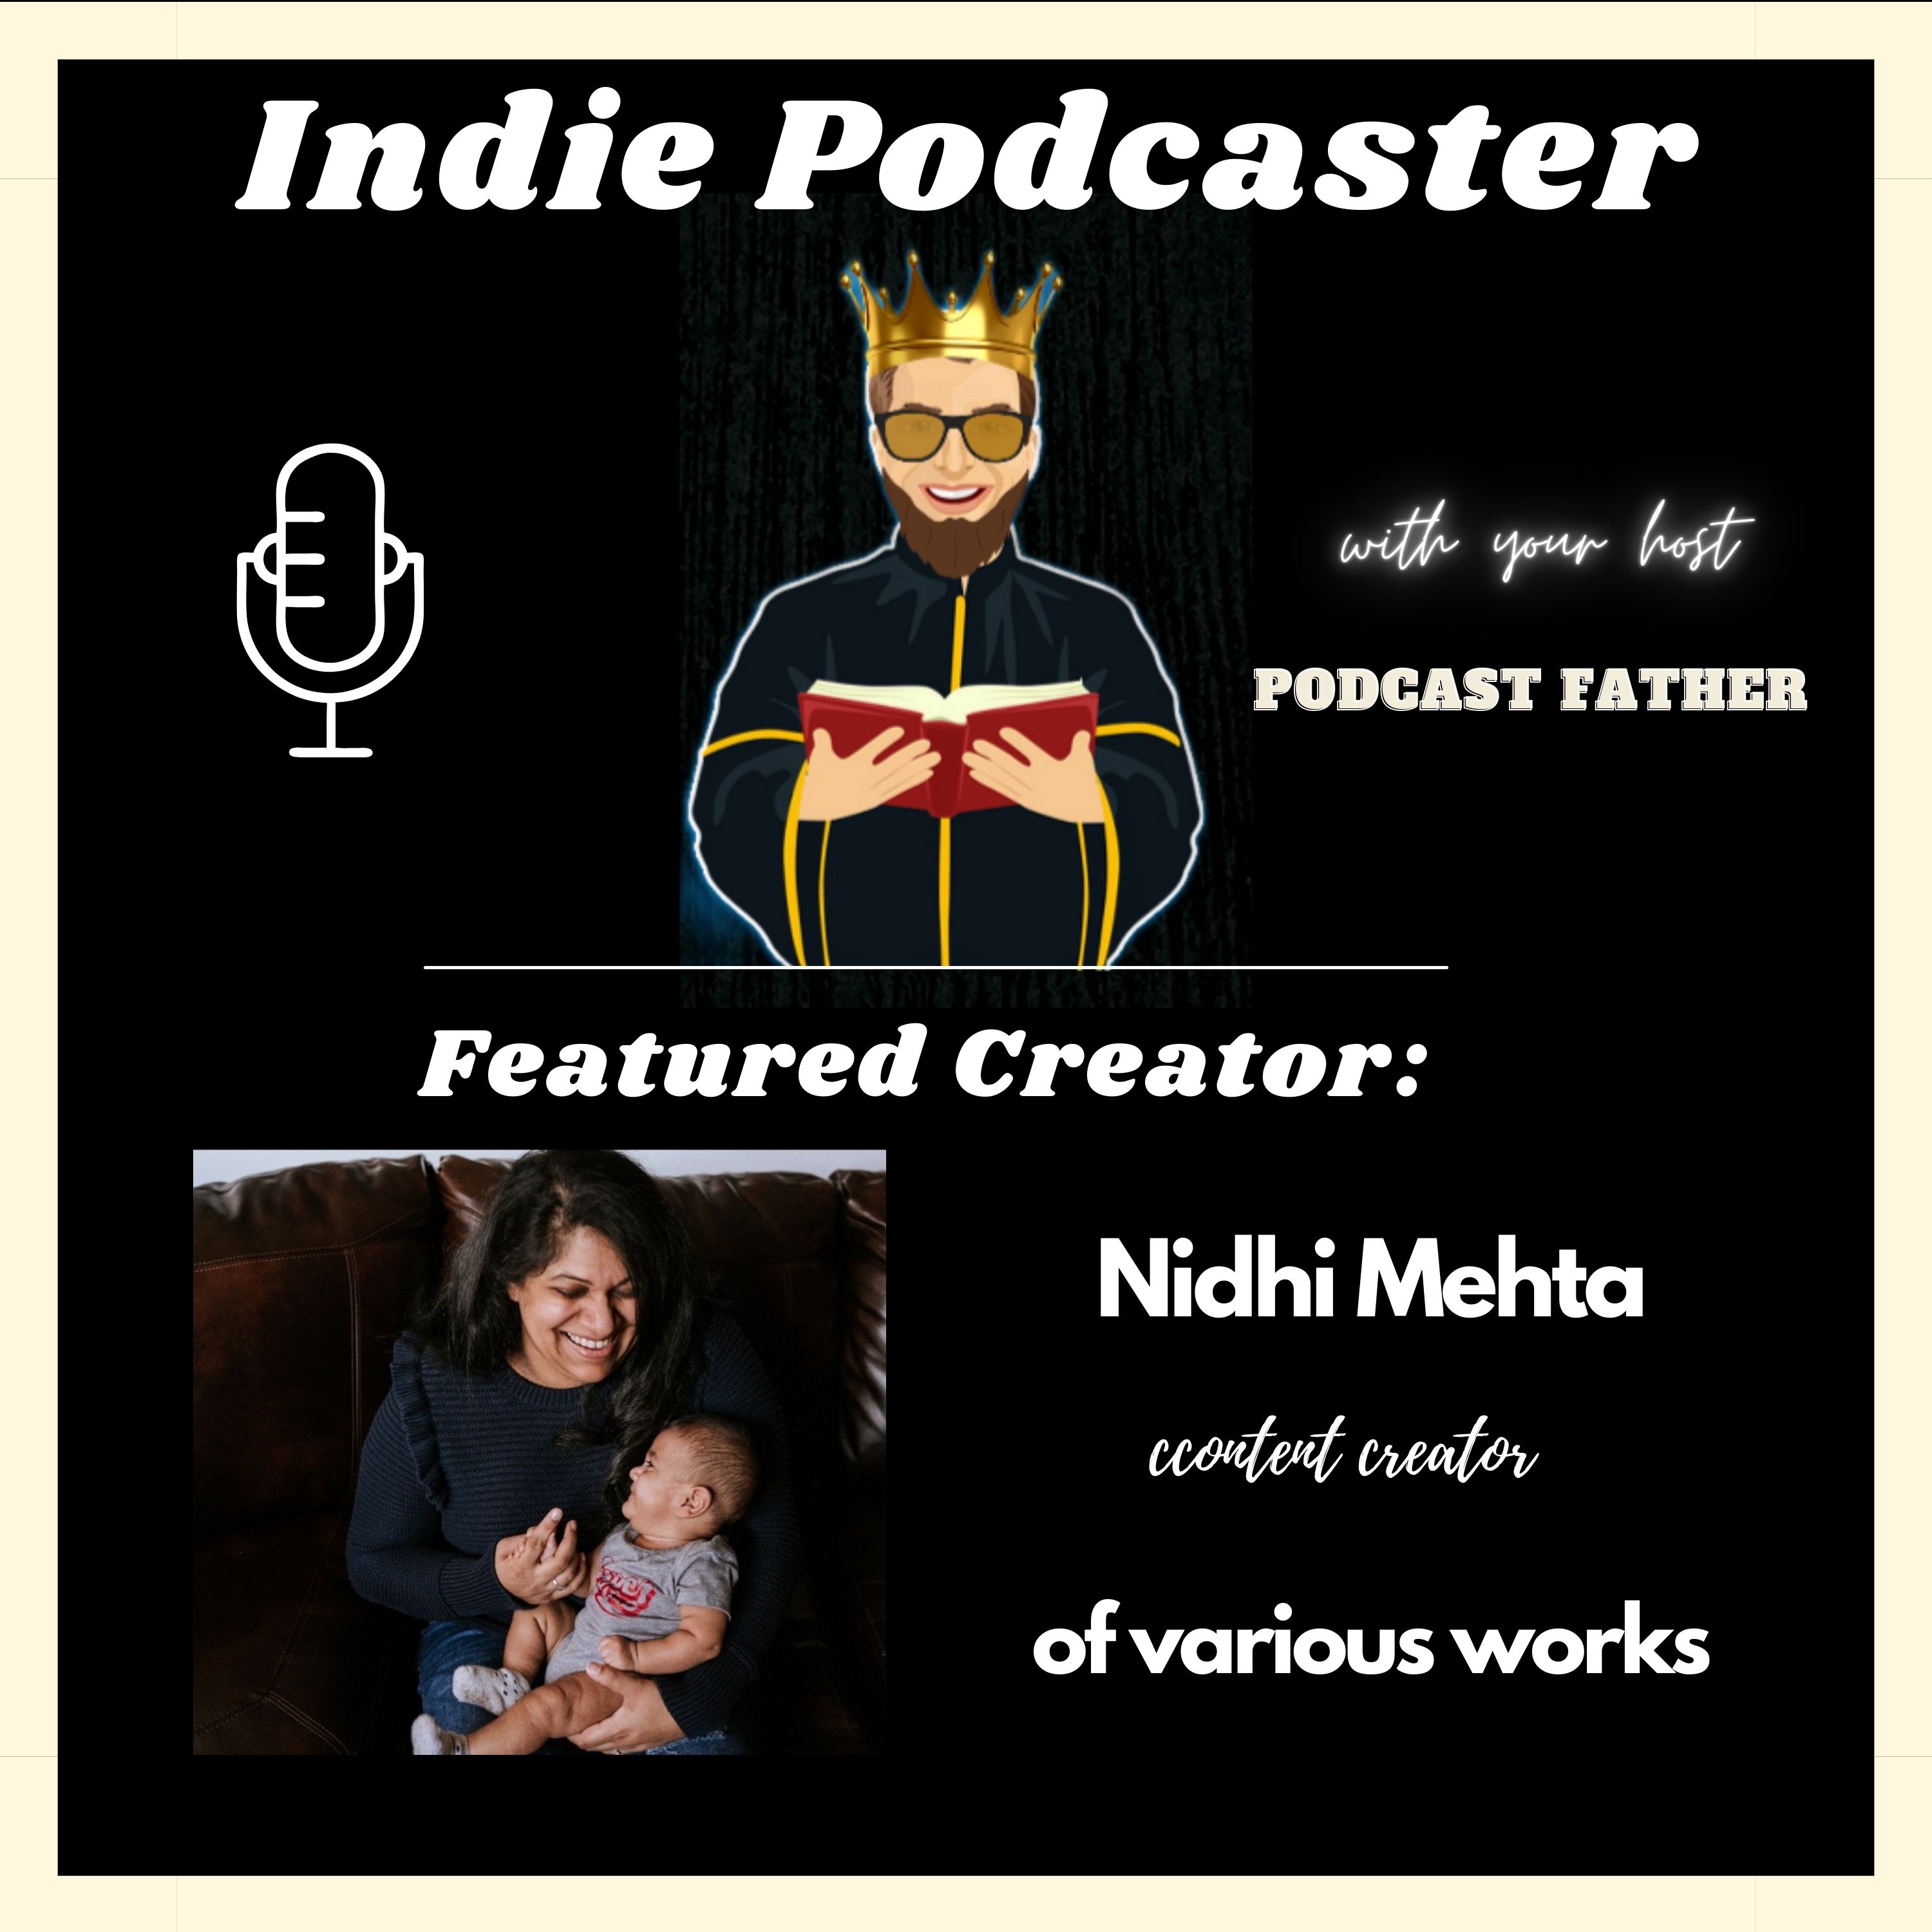 Nidhi Mehta, content creator of various works Image